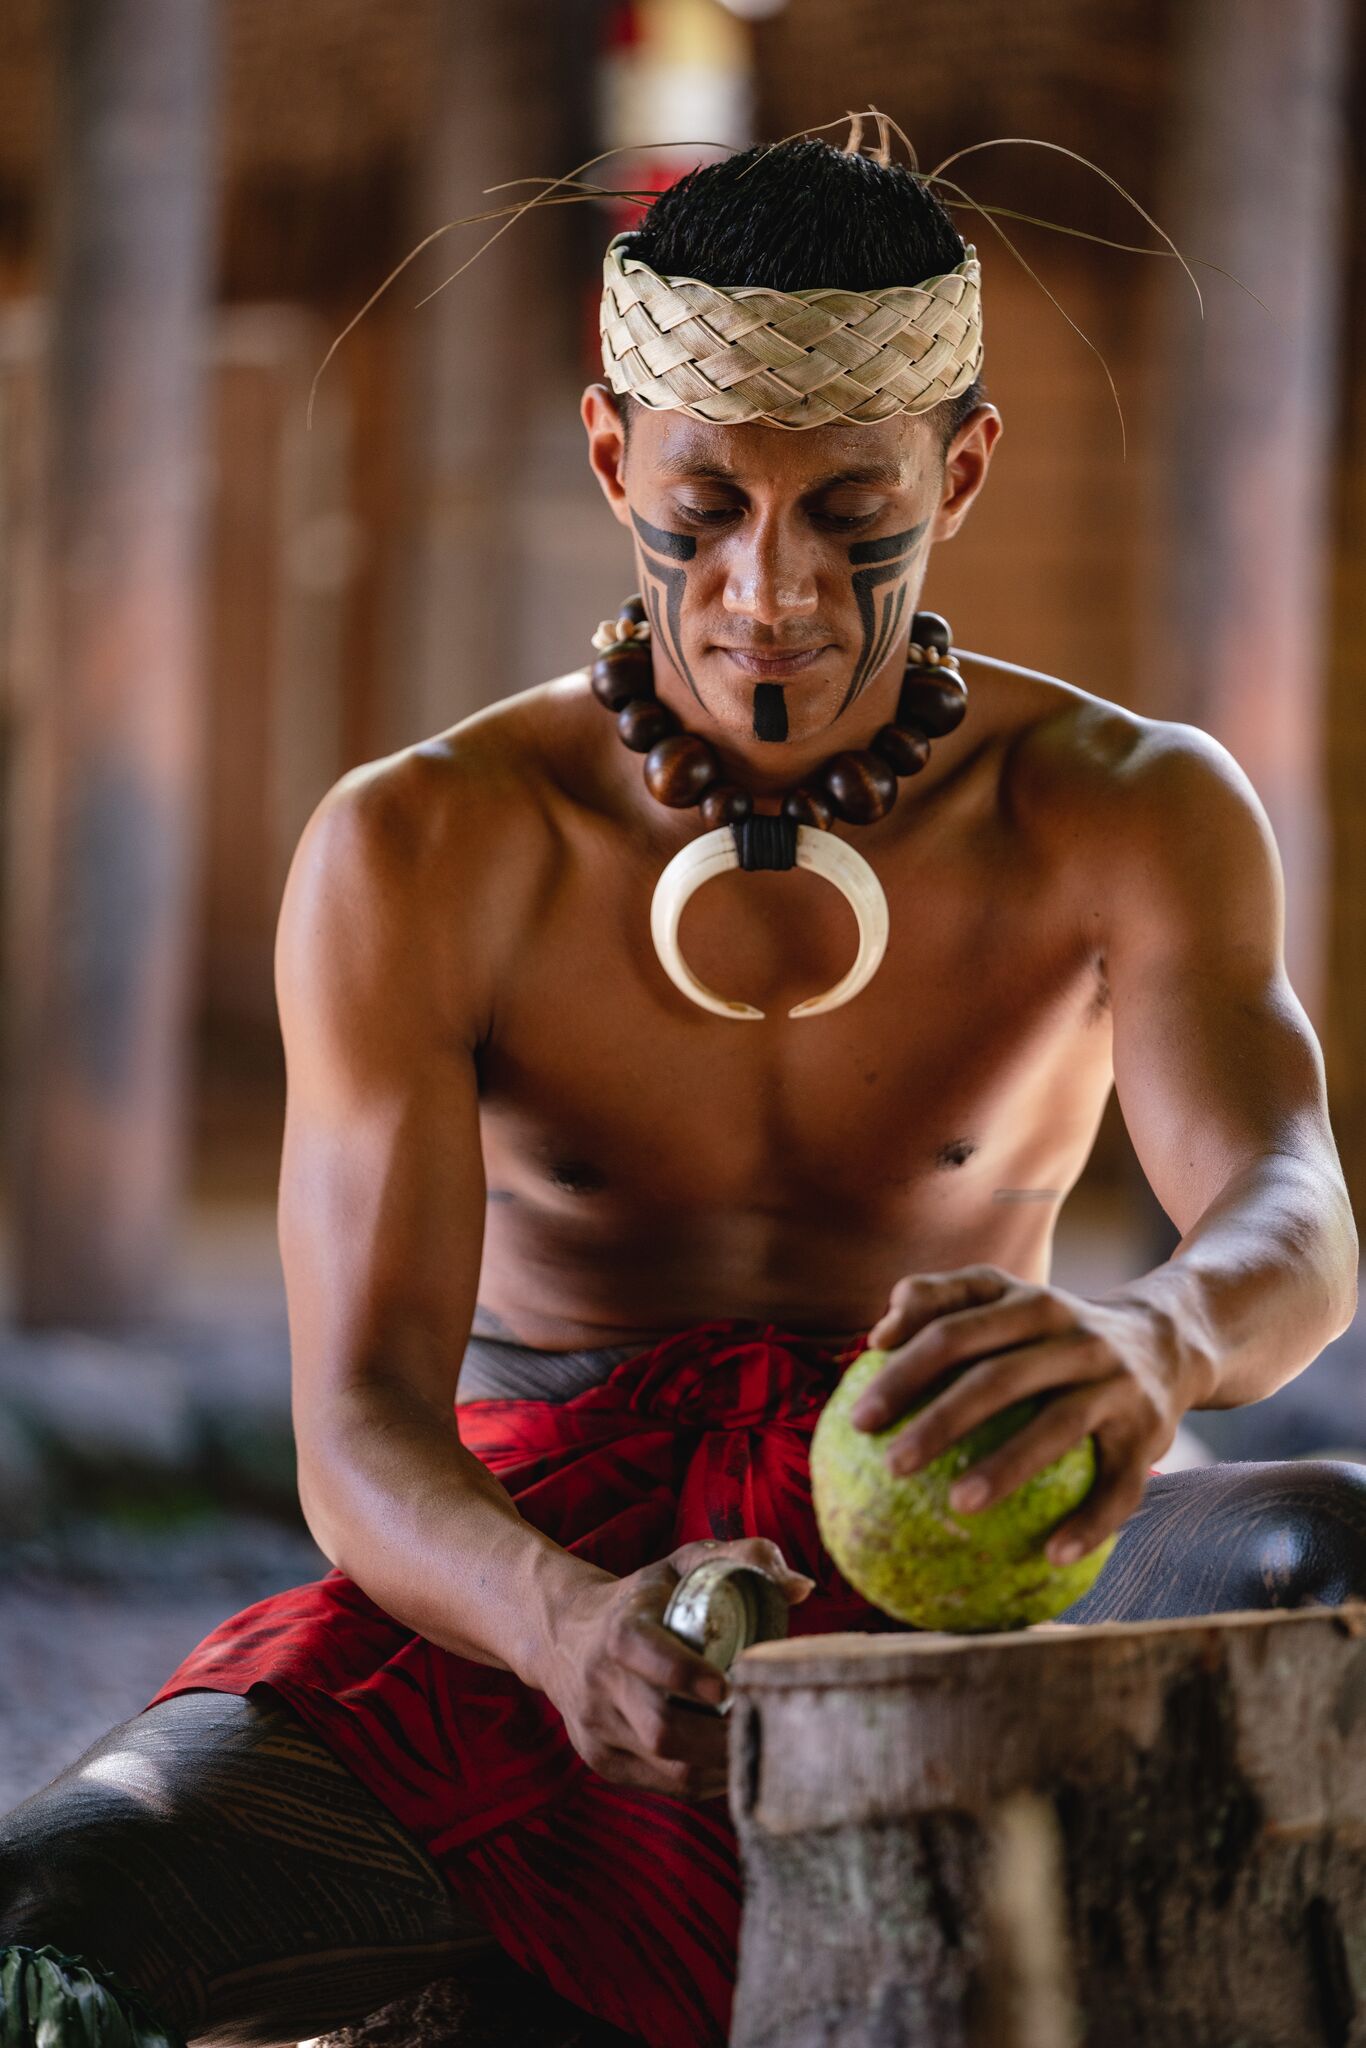 Picture: Preparing breadfruit in the Samoan Village at the Polynesian Cultural Center